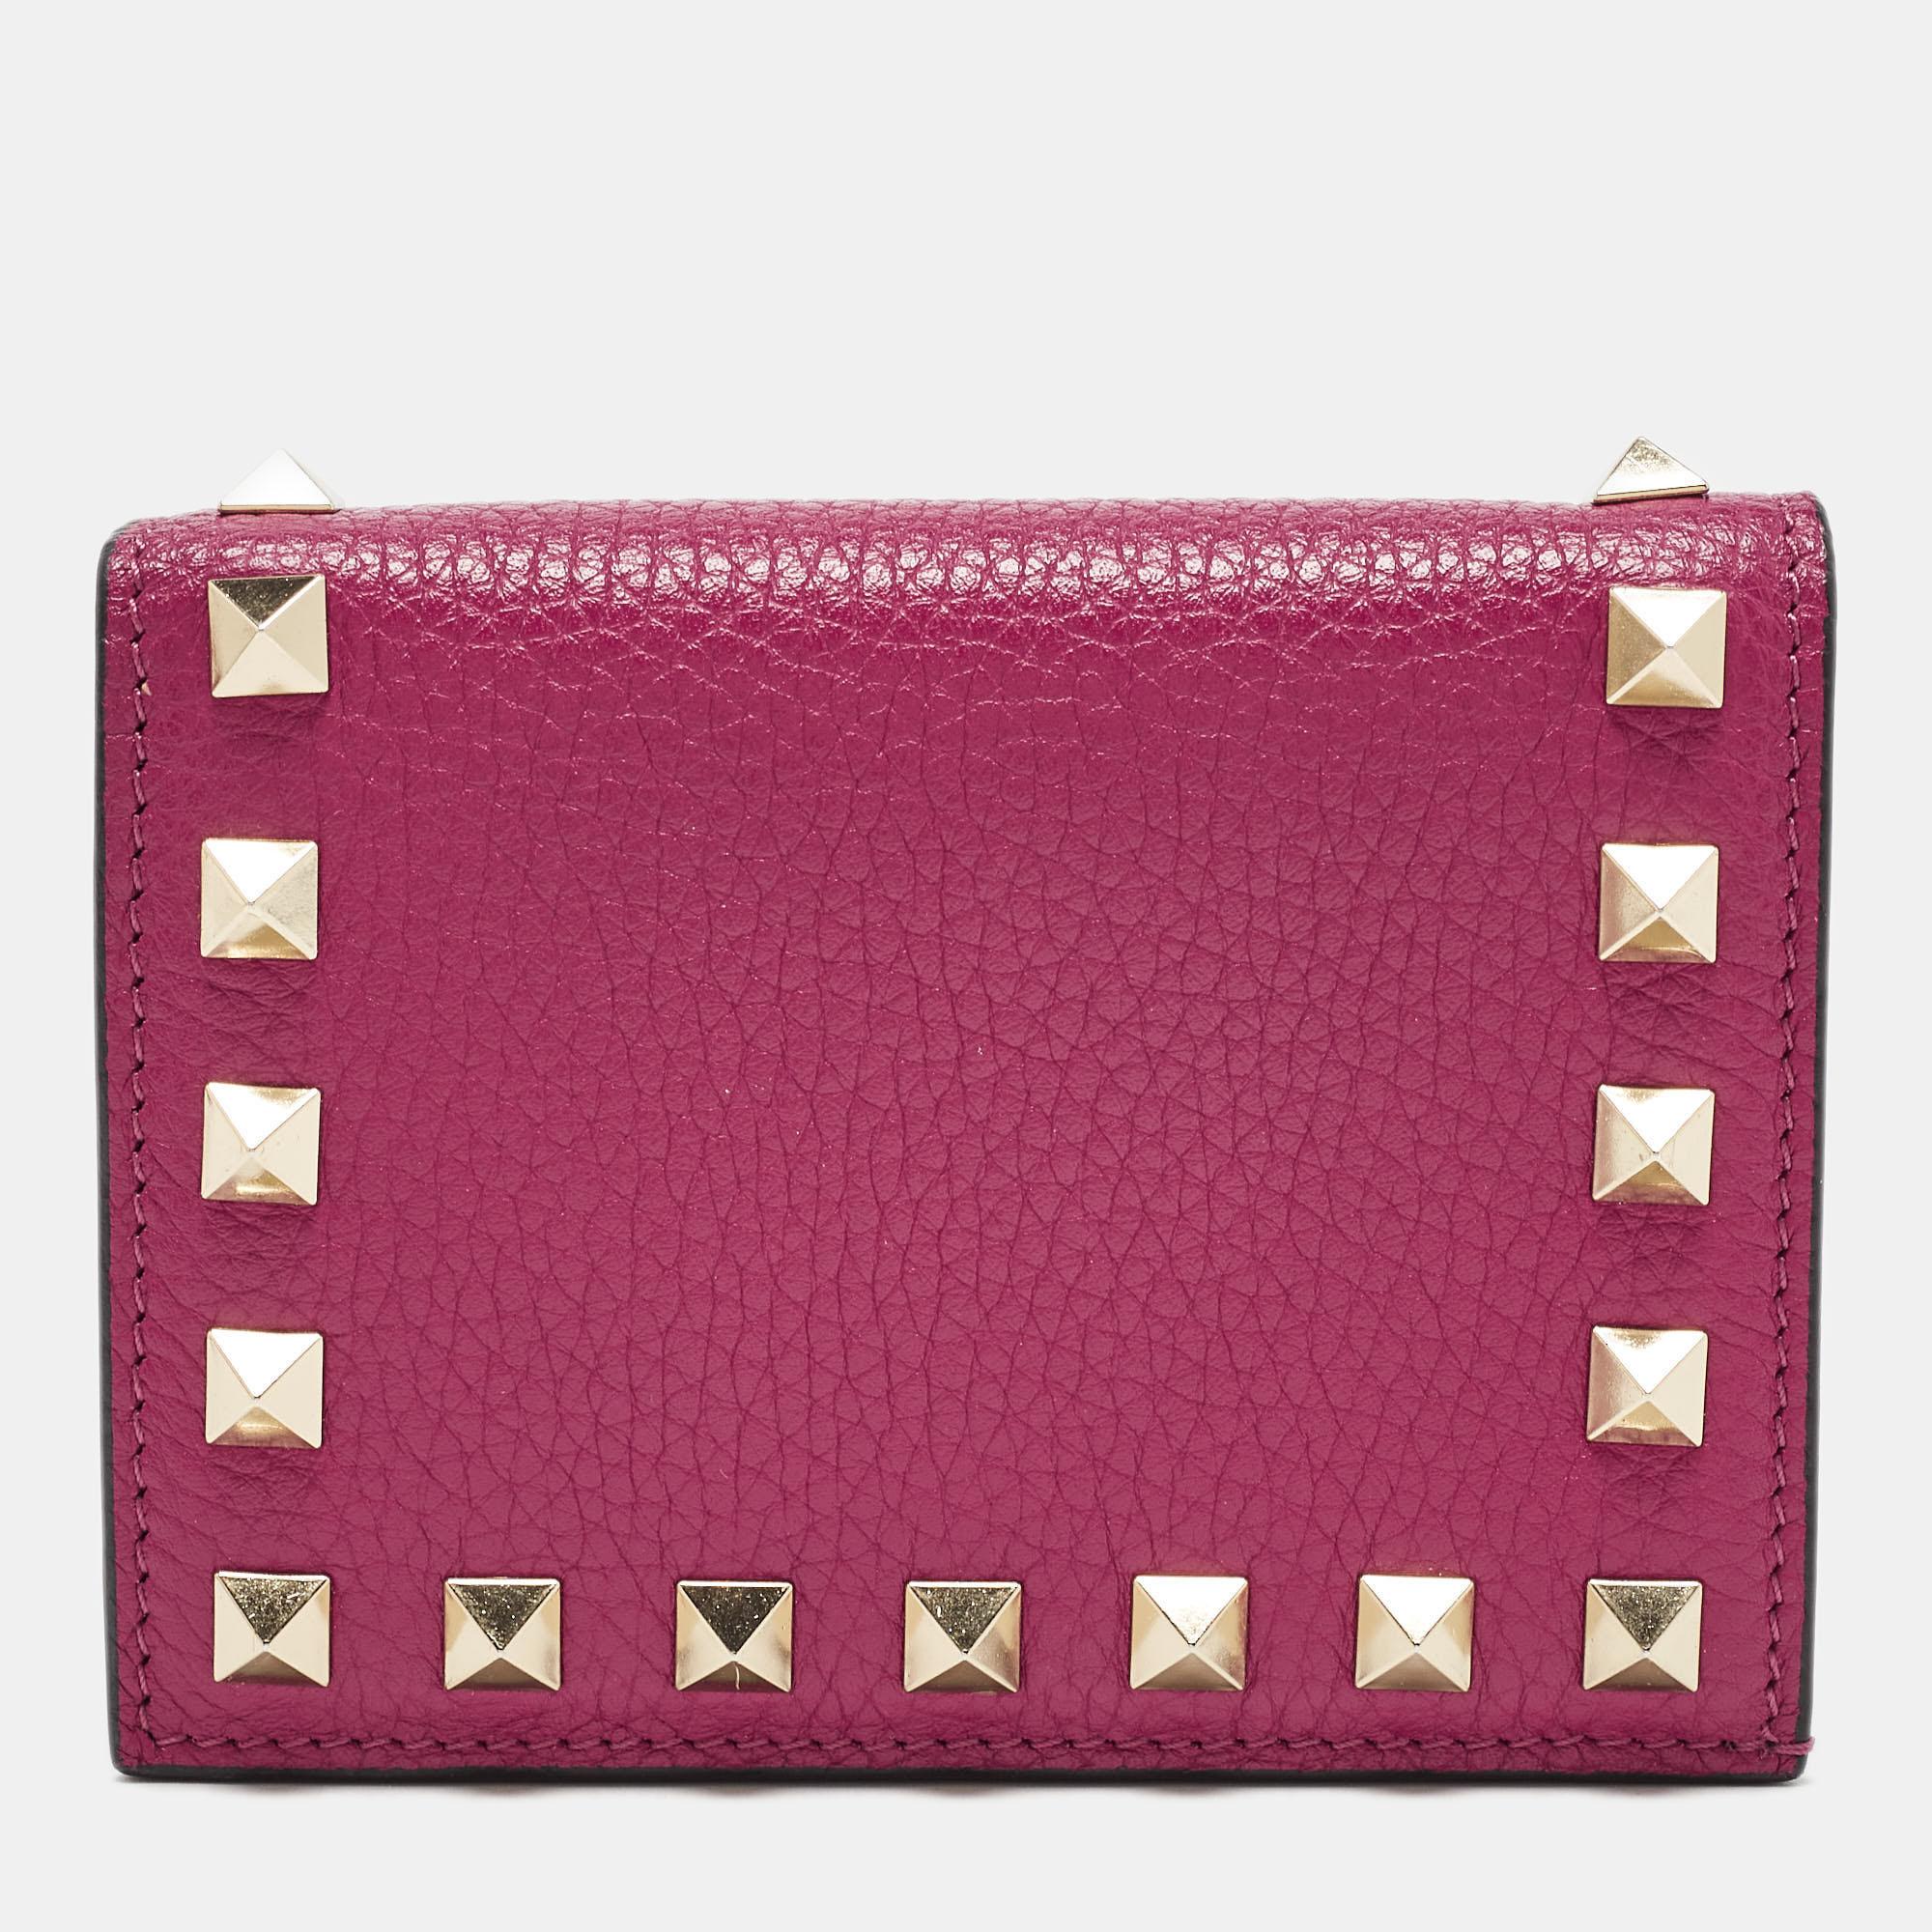 This Valentino wallet is an immaculate balance of sophistication and rational utility. It has been designed using prime quality materials and elevated by a sleek finish. The creation is equipped with ample space for your monetary essentials.

